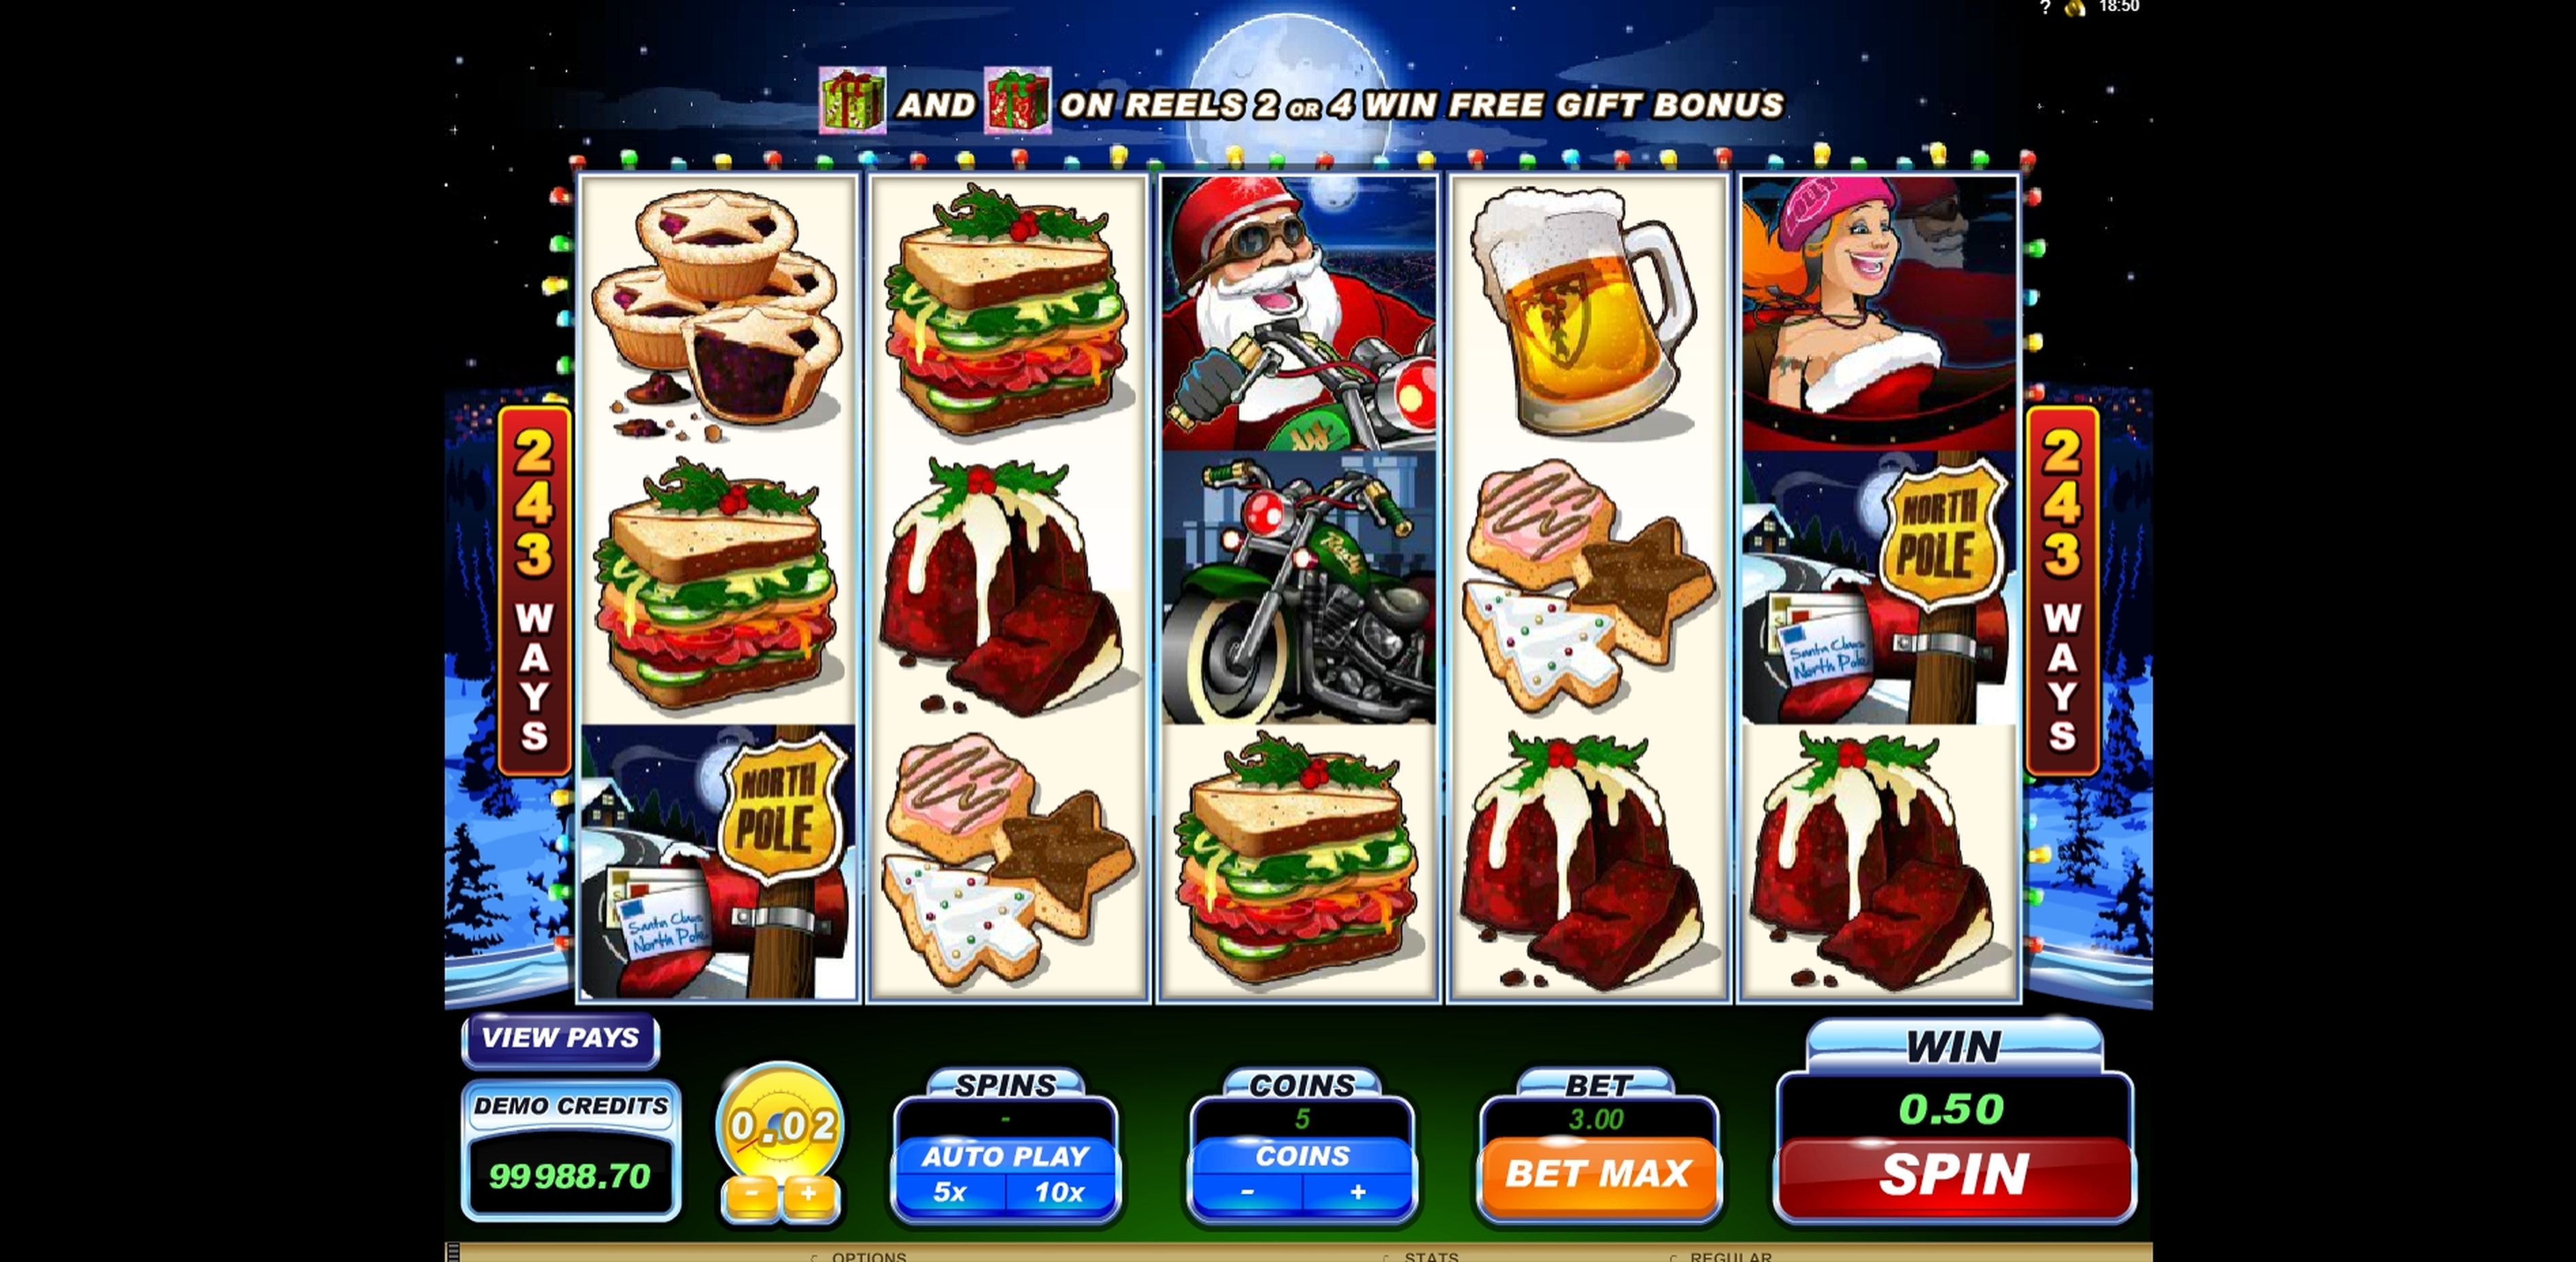 Win Money in Santa's Wild Ride Free Slot Game by Microgaming